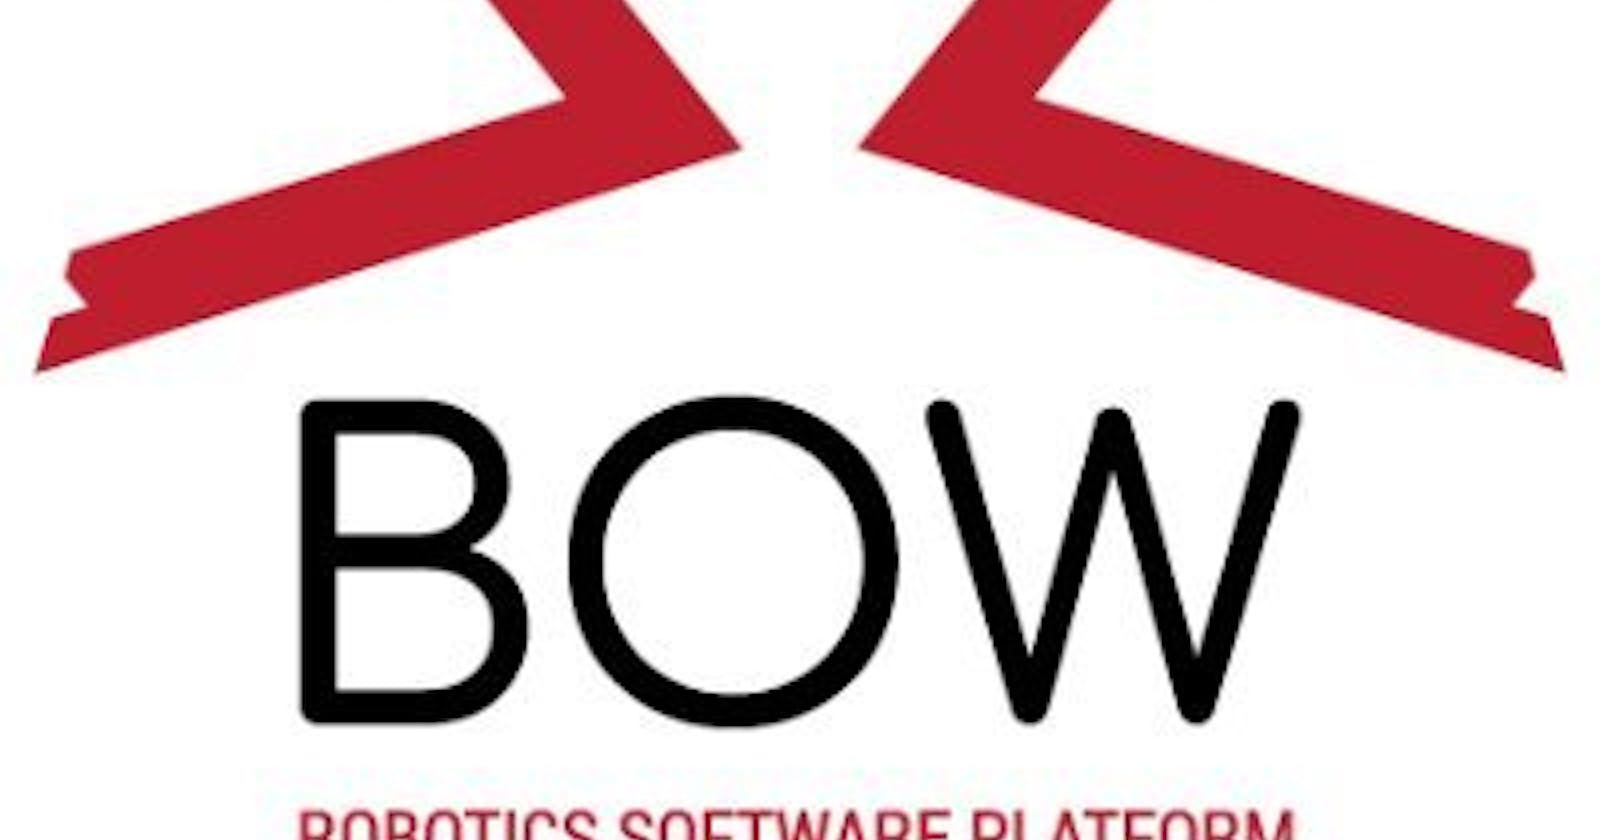 BOW is making it quicker, easier and cheaper to code and control all forms of robotics, and opening up robotics to mainstream software developers.